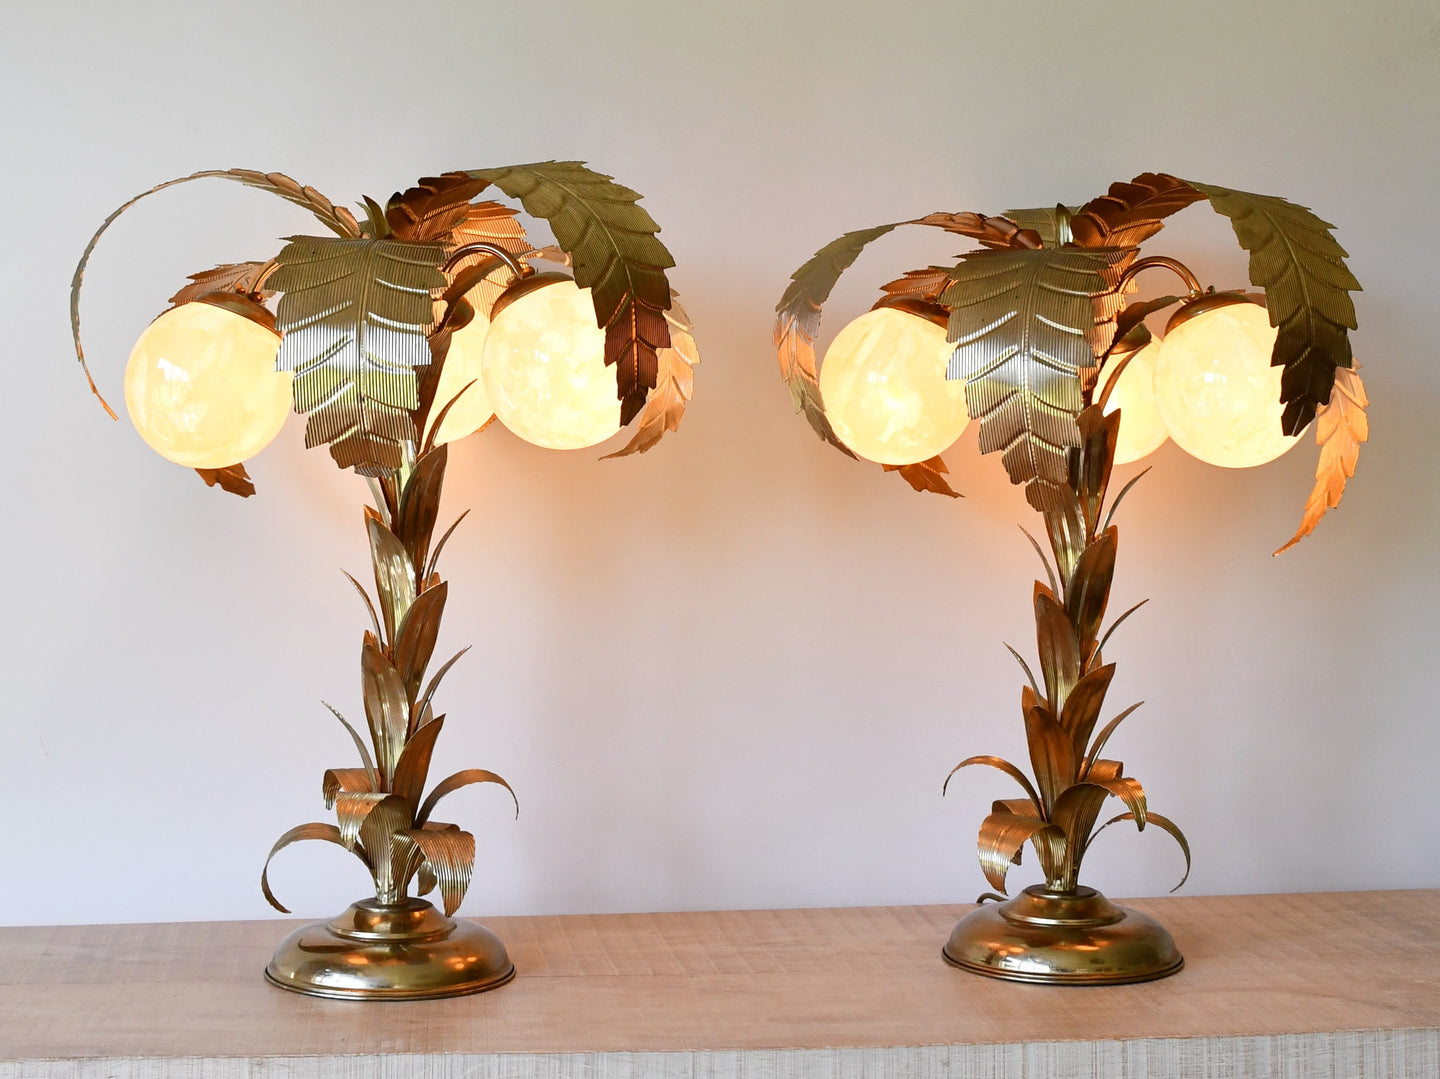 A Pair of Vintage - Italian Palm Tree - Table Lamps